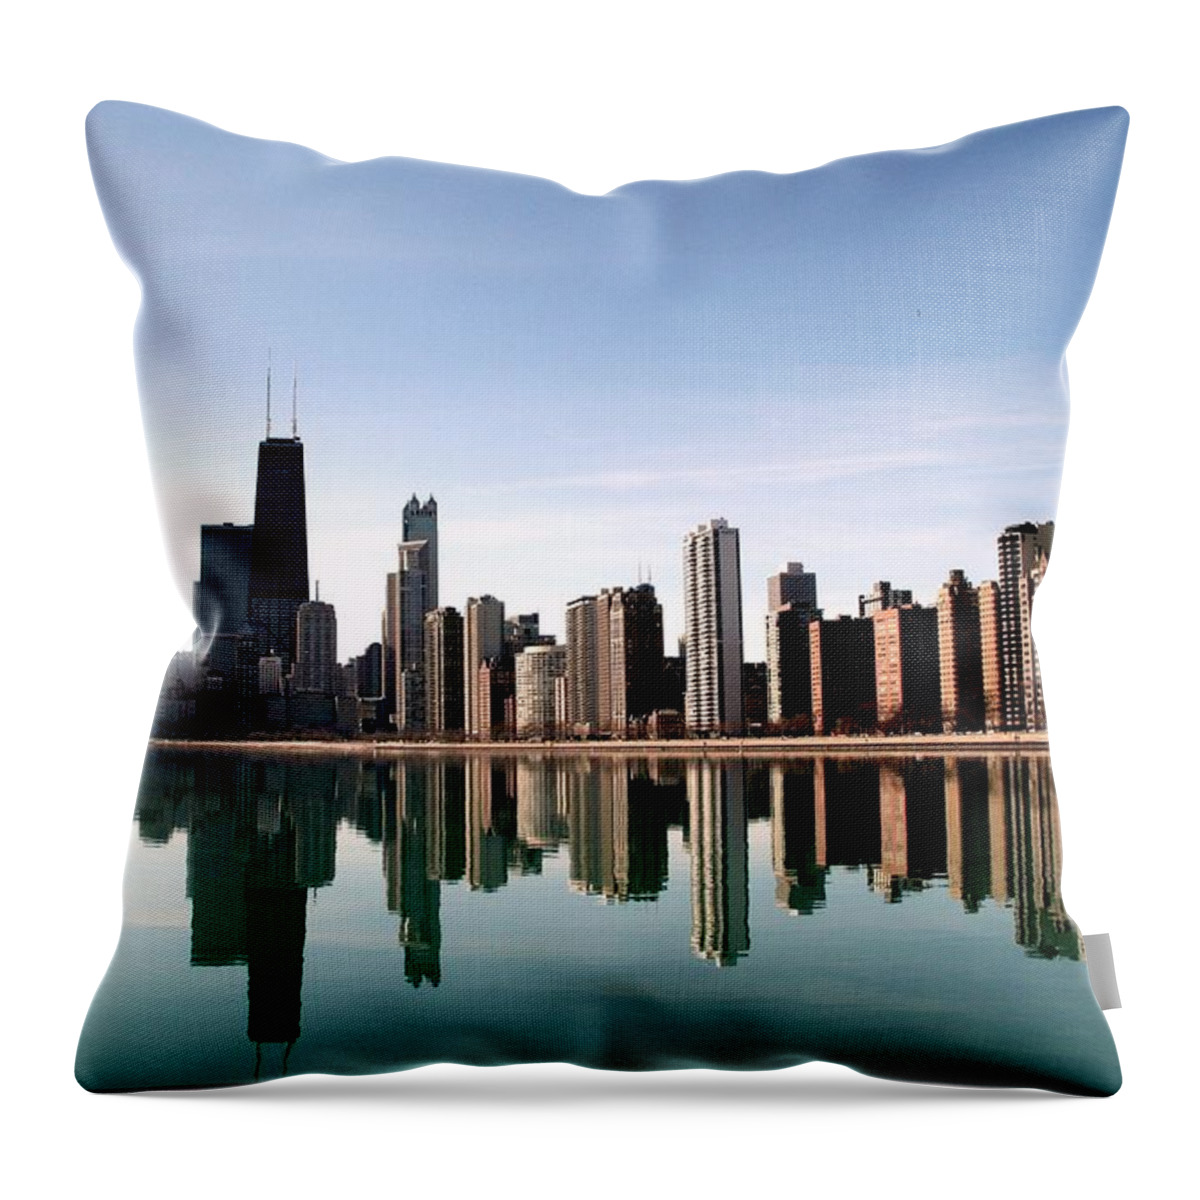 Lake Michigan Throw Pillow featuring the photograph Chicago Skyline #4 by J.castro